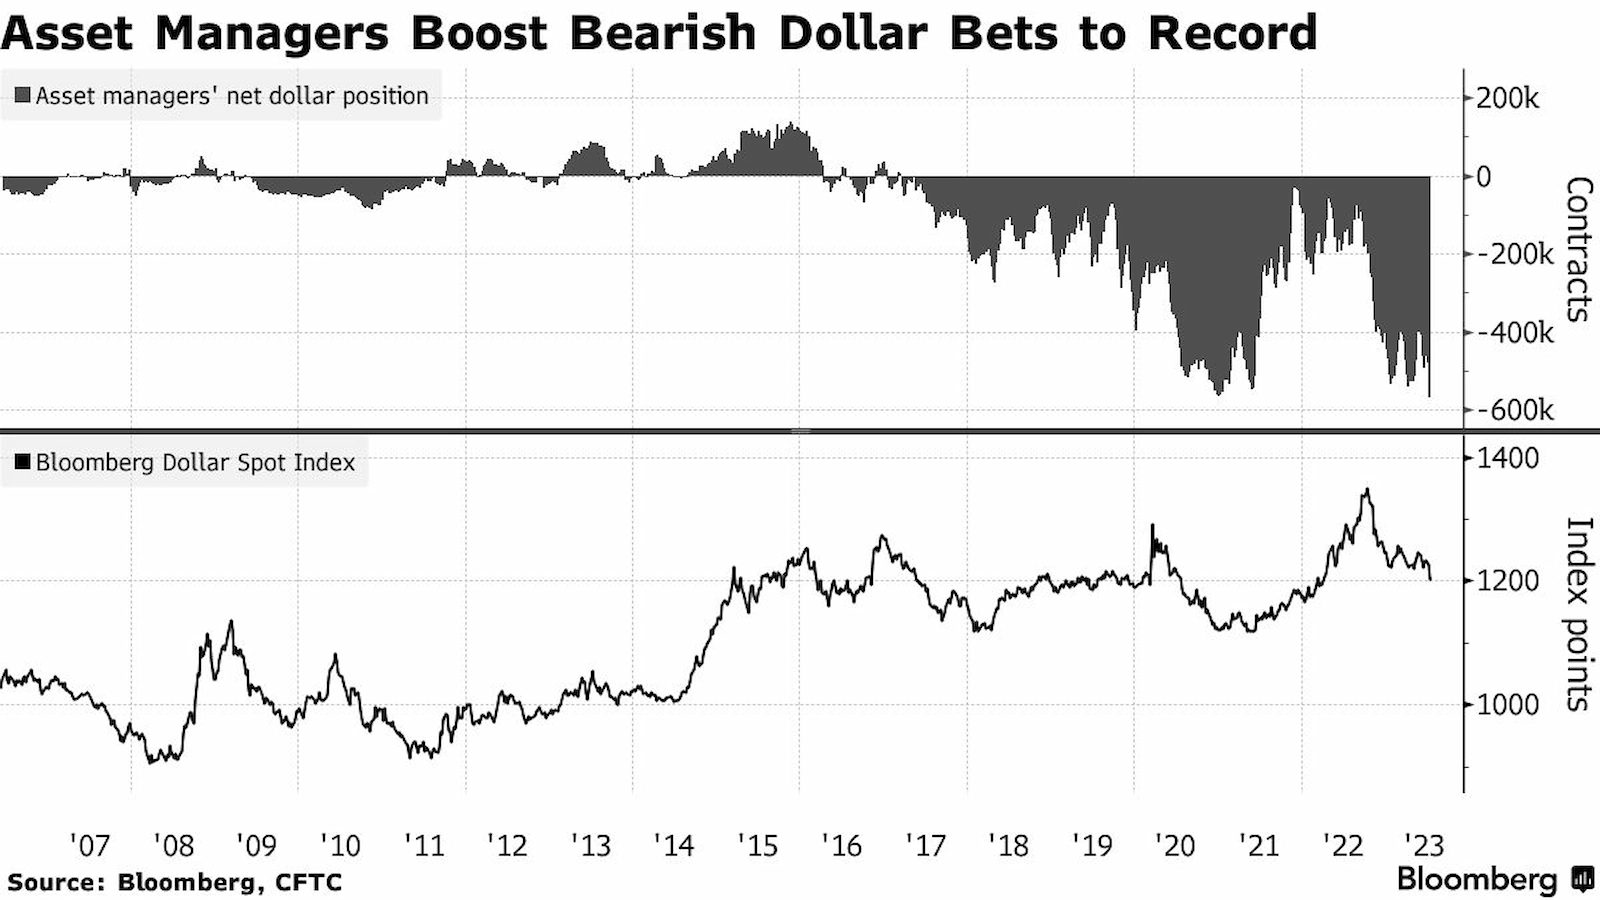 Bearish bets against the US dollar reached a record high